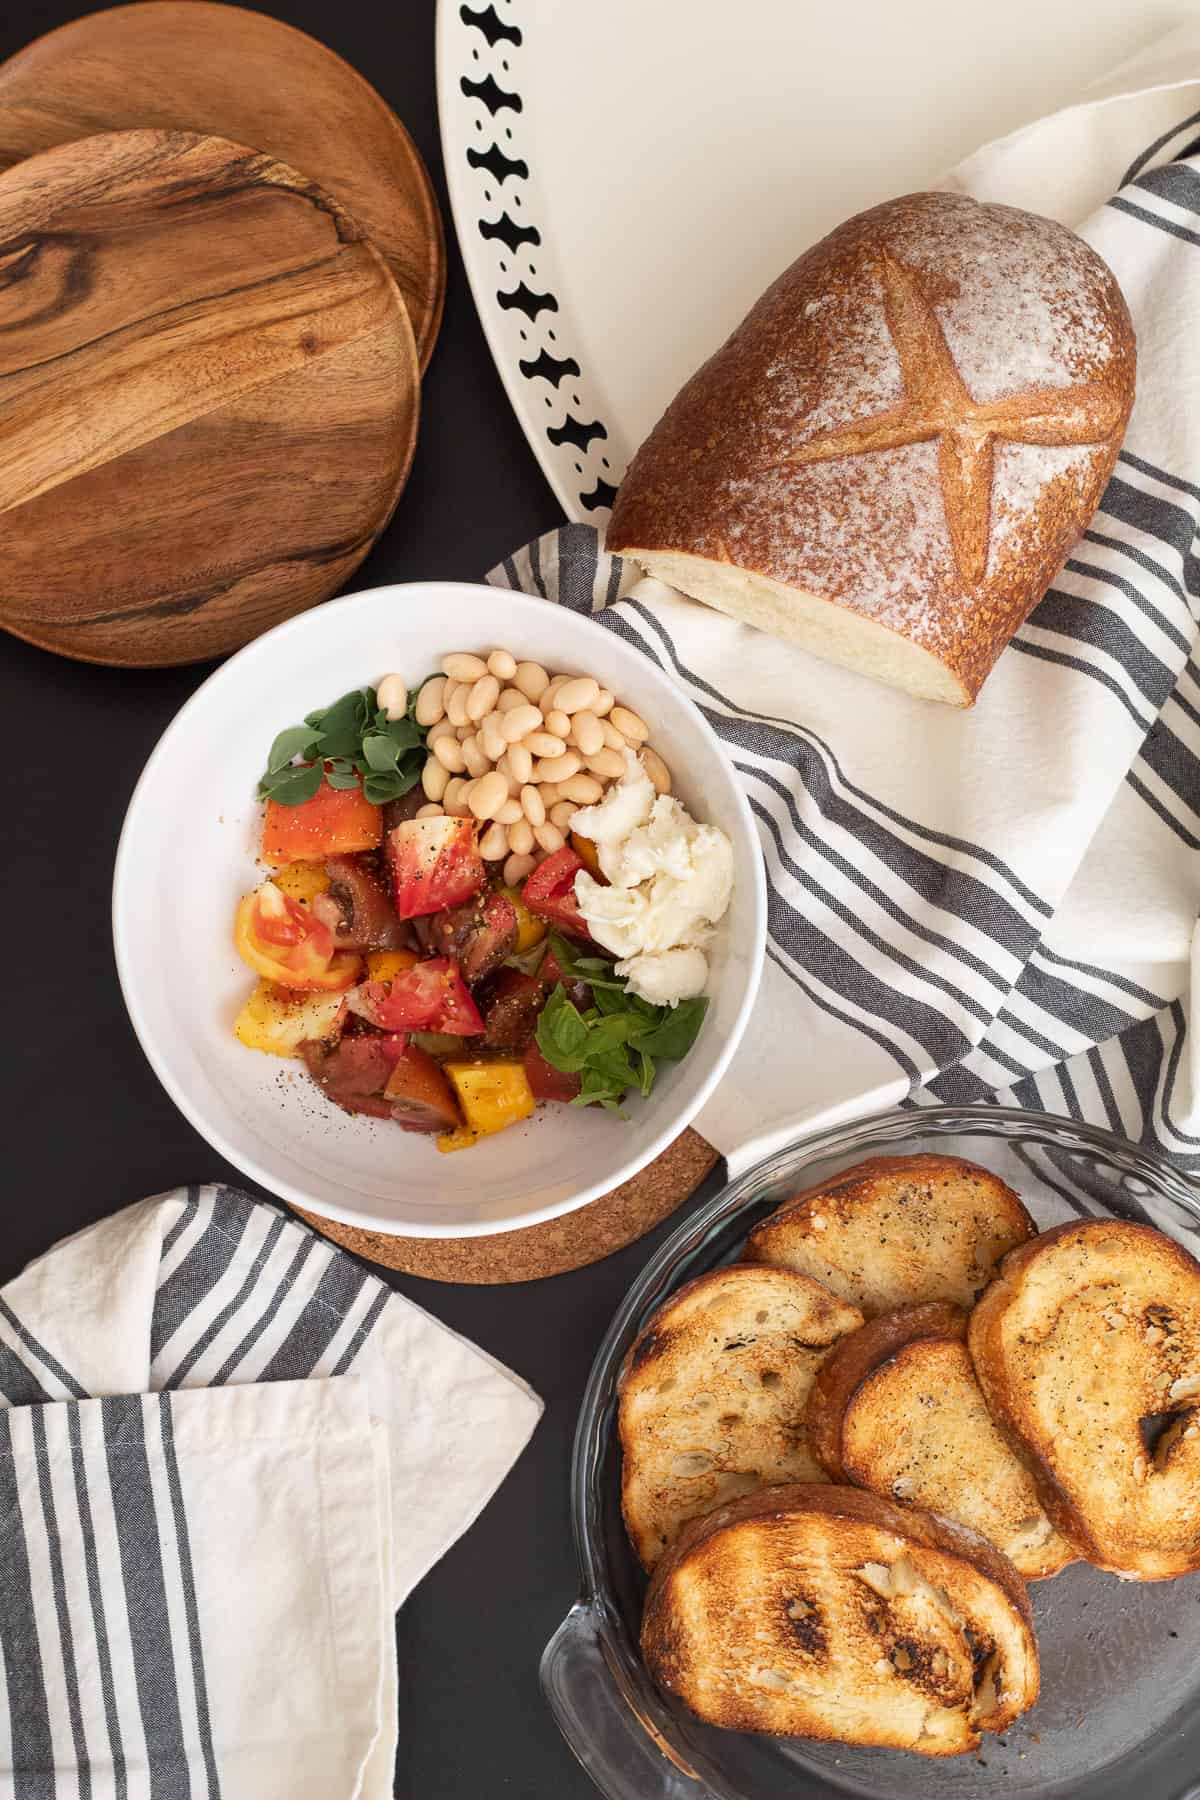 The grilled bread sits in a pie plate at the bottom of the image with the bowl of the rest of the salad ingredients in the center. Everything sits on a black surface with gray and white striped towels.